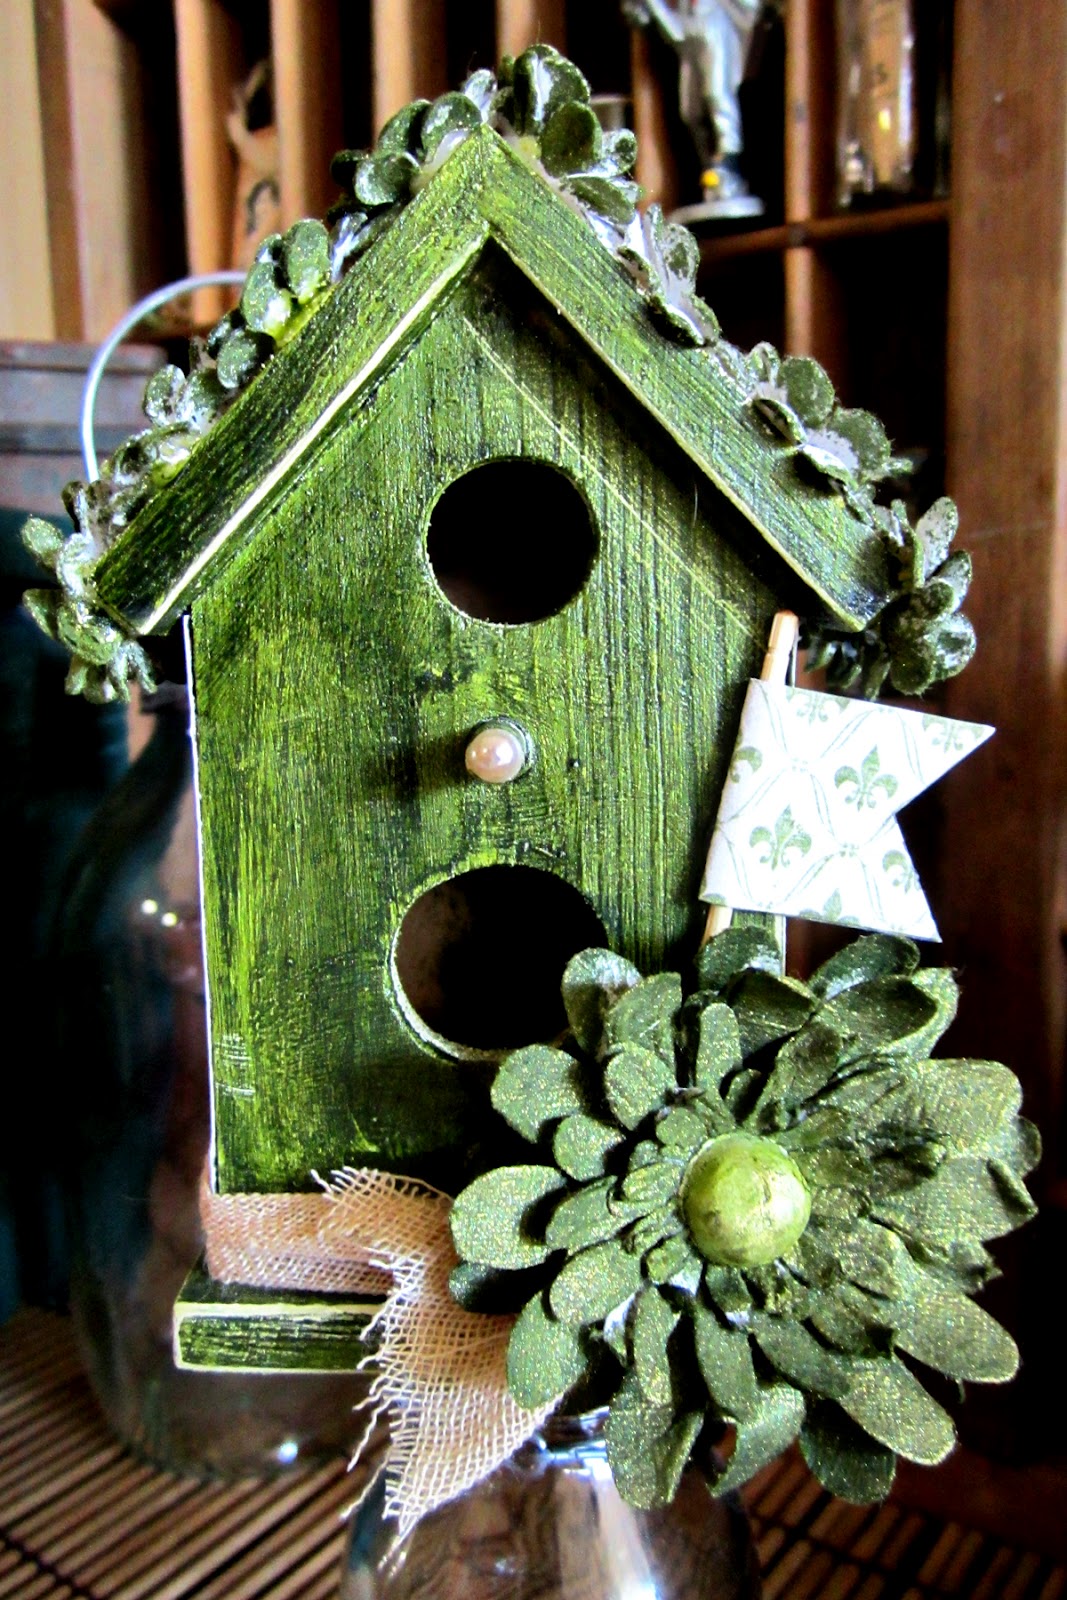 DIY Birdhouse Plans and Ideas - The Spruce Crafts